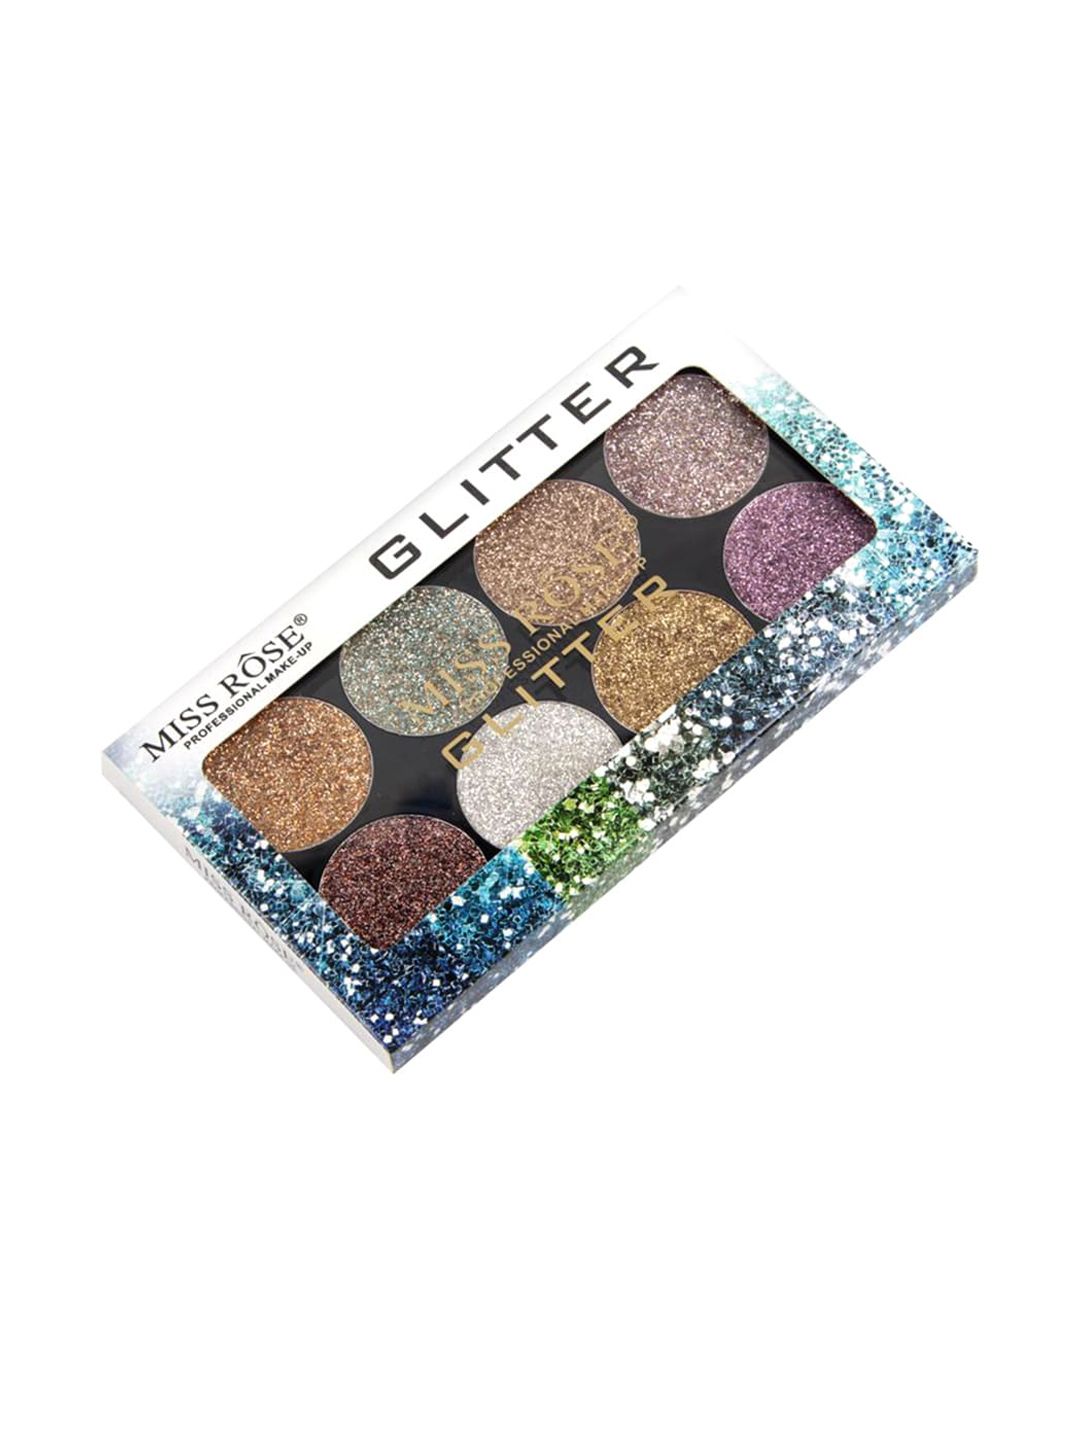 MISS ROSE 8 Color Glitter Eyeshadow Palette Price in India